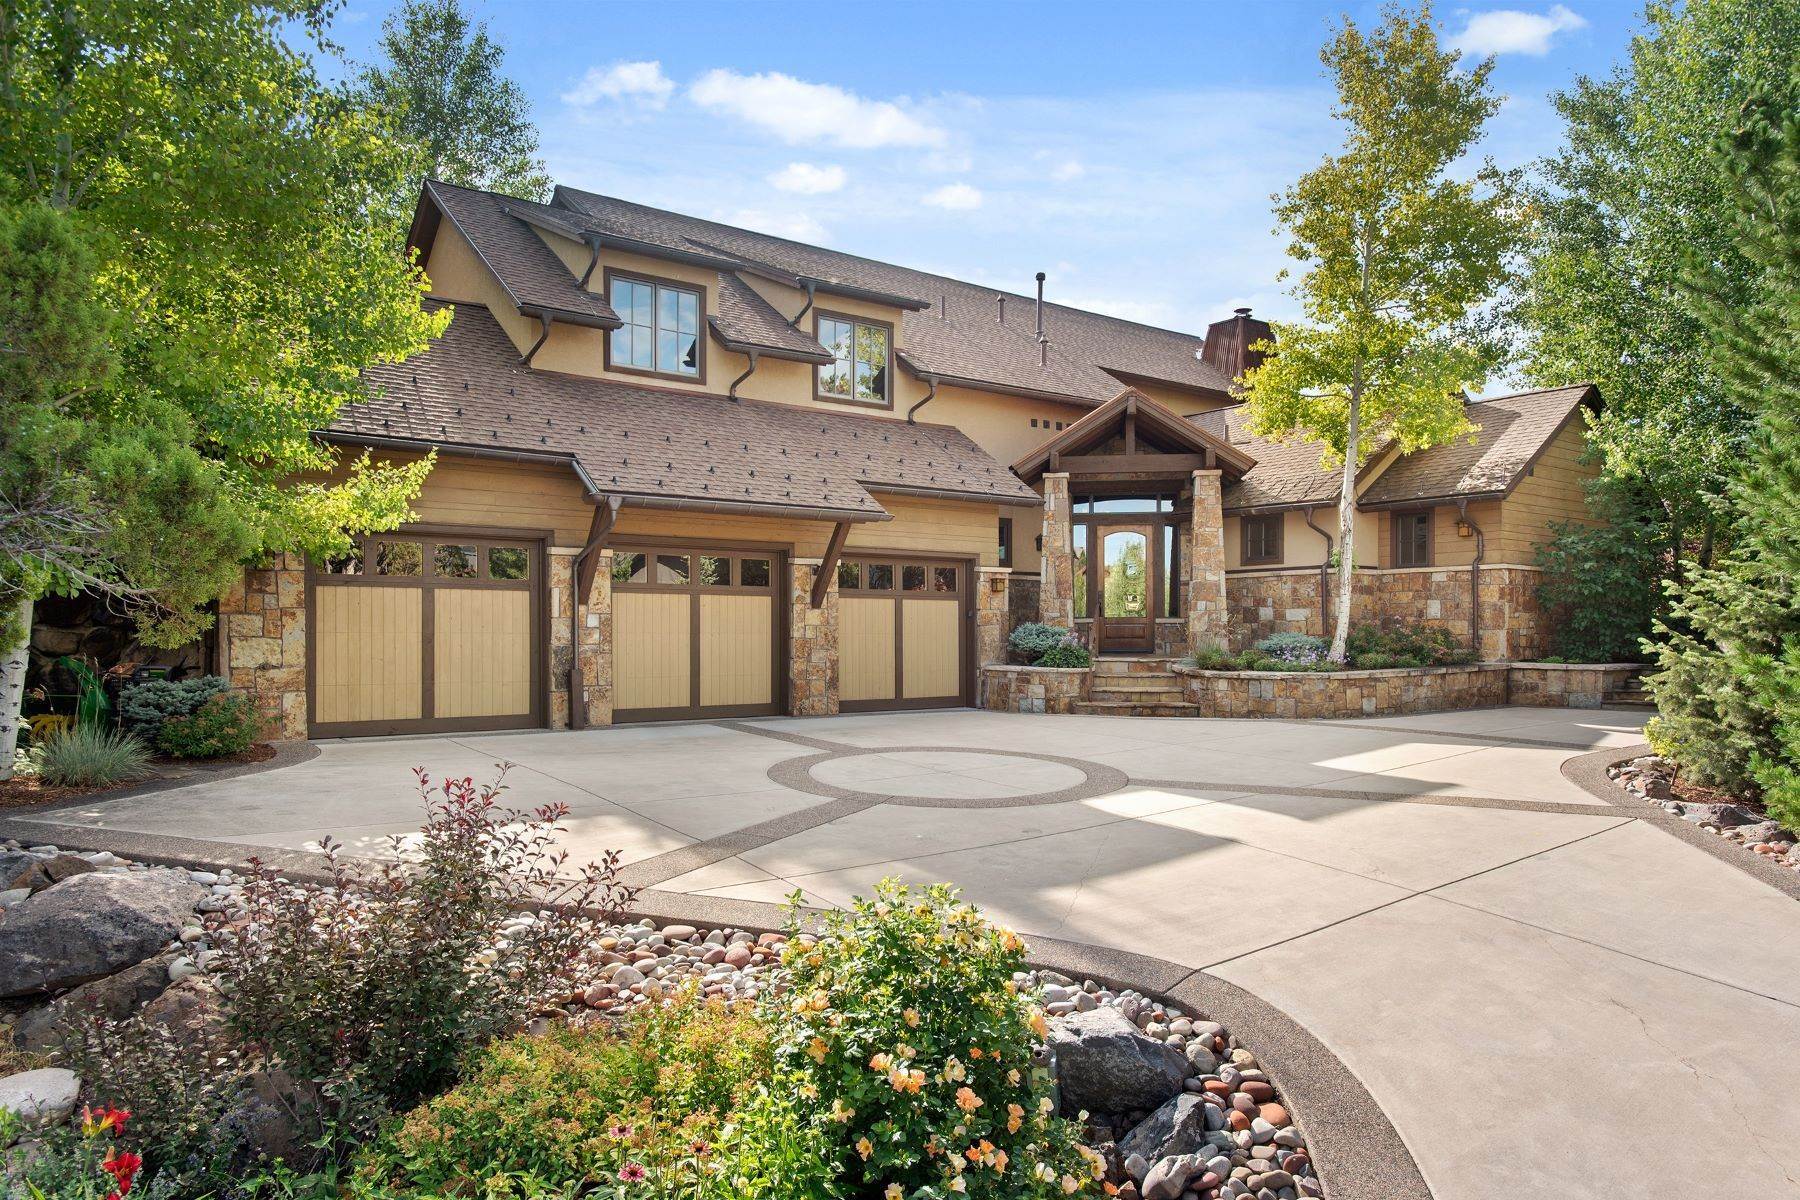 Single Family Homes for Active at High on Hillcrest 474 Hillcrest Drive Basalt, Colorado 81621 United States